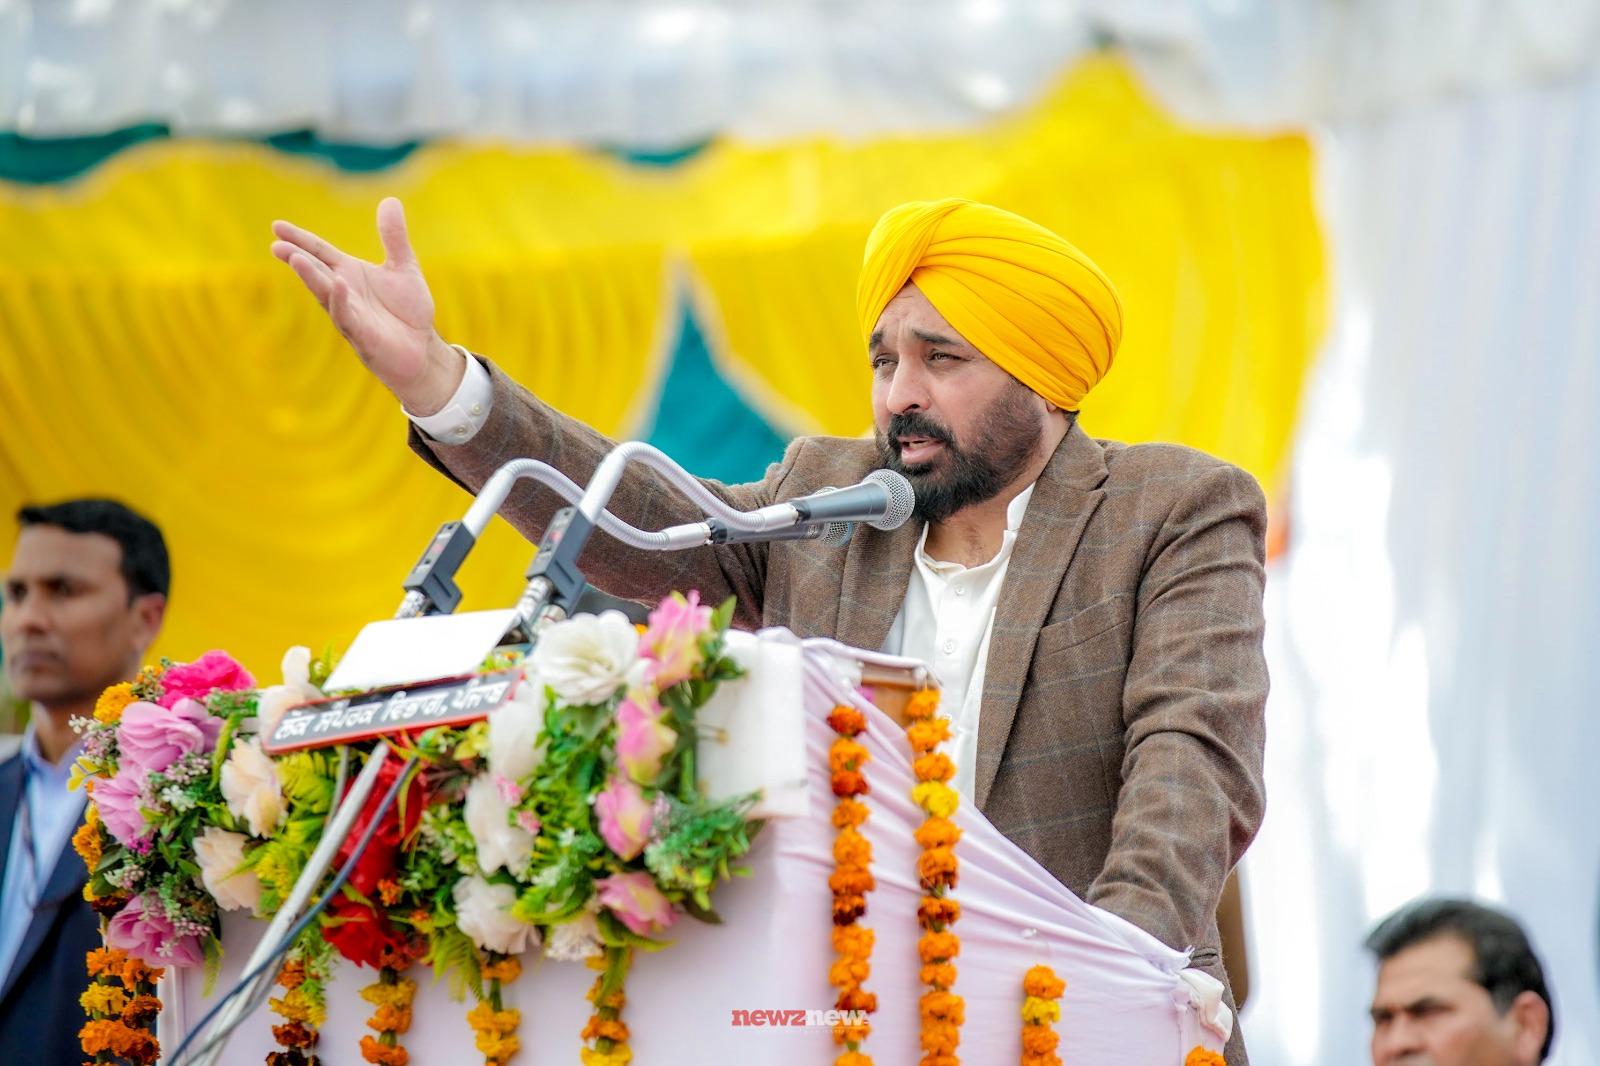 CM gives bonanza of development projects worth Rs 283 crore to Jalandhar residents